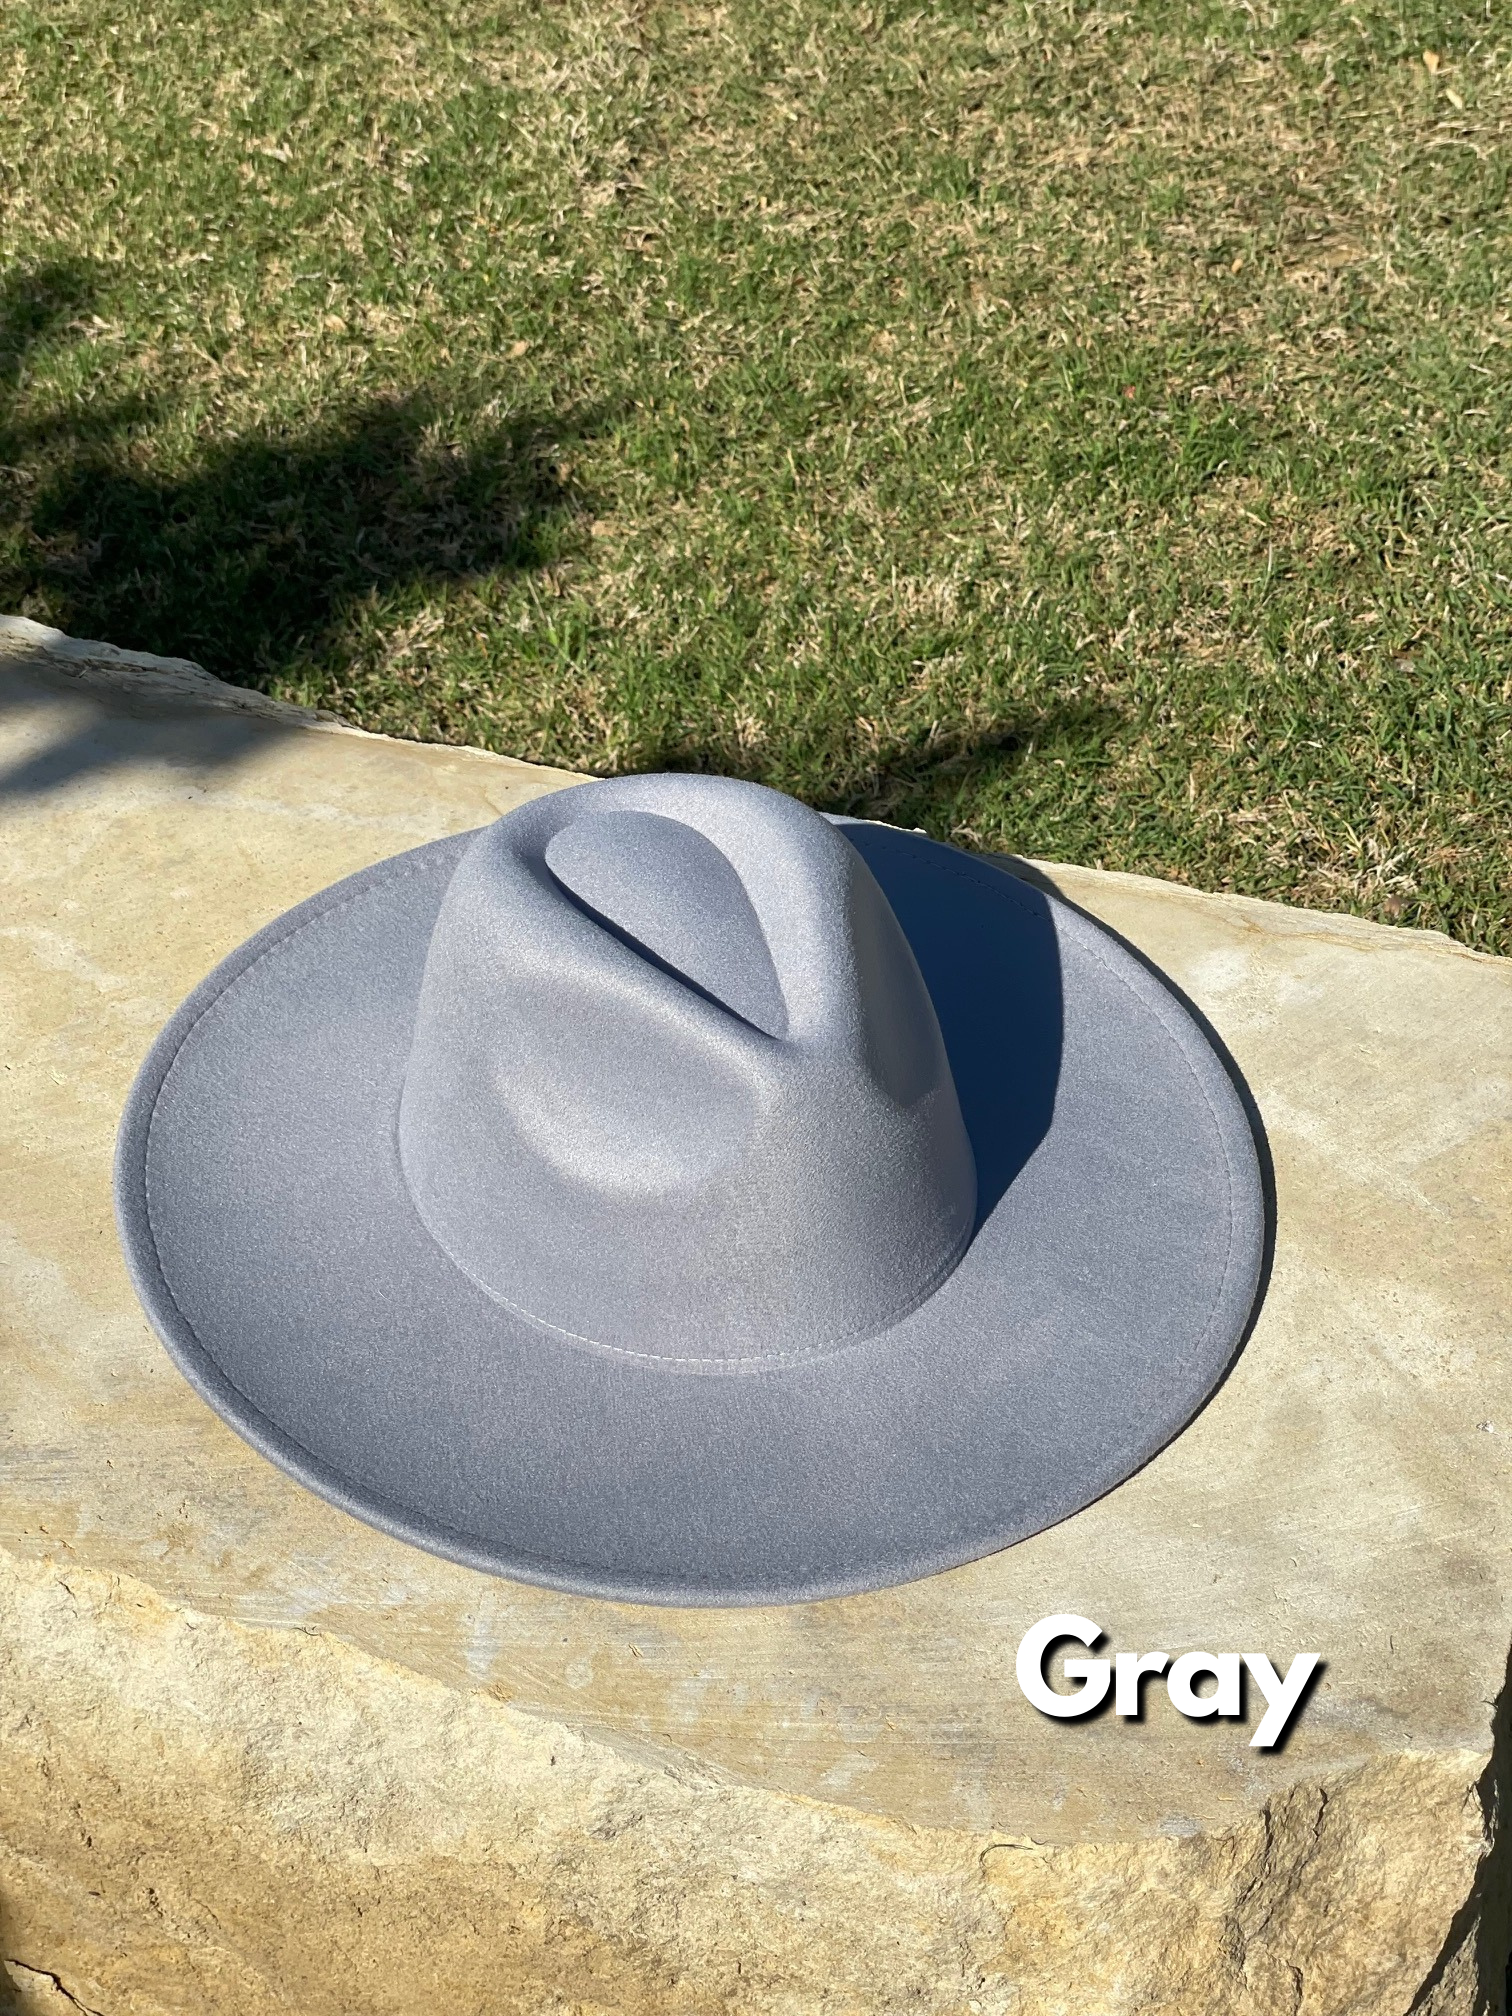 Gray fedora hat in natural light.